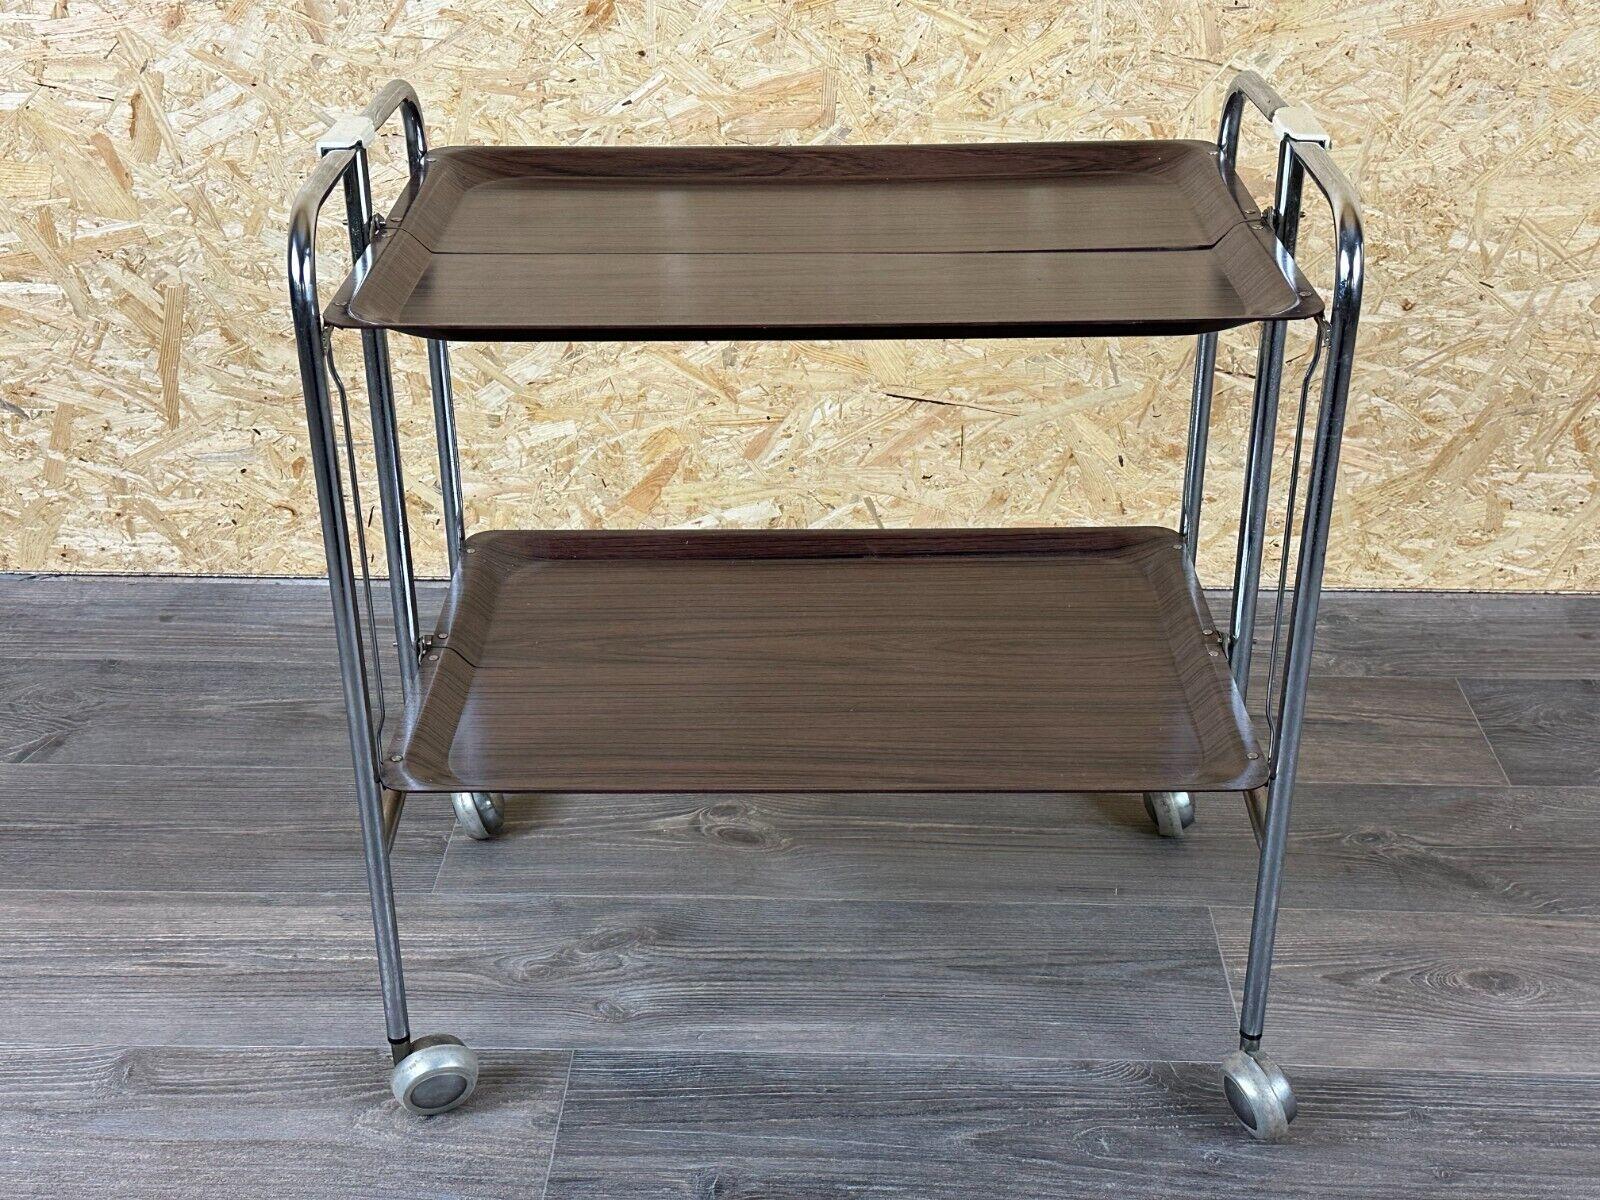 60s 70s serving trolley dinette side table space age brown design im Angebot 6